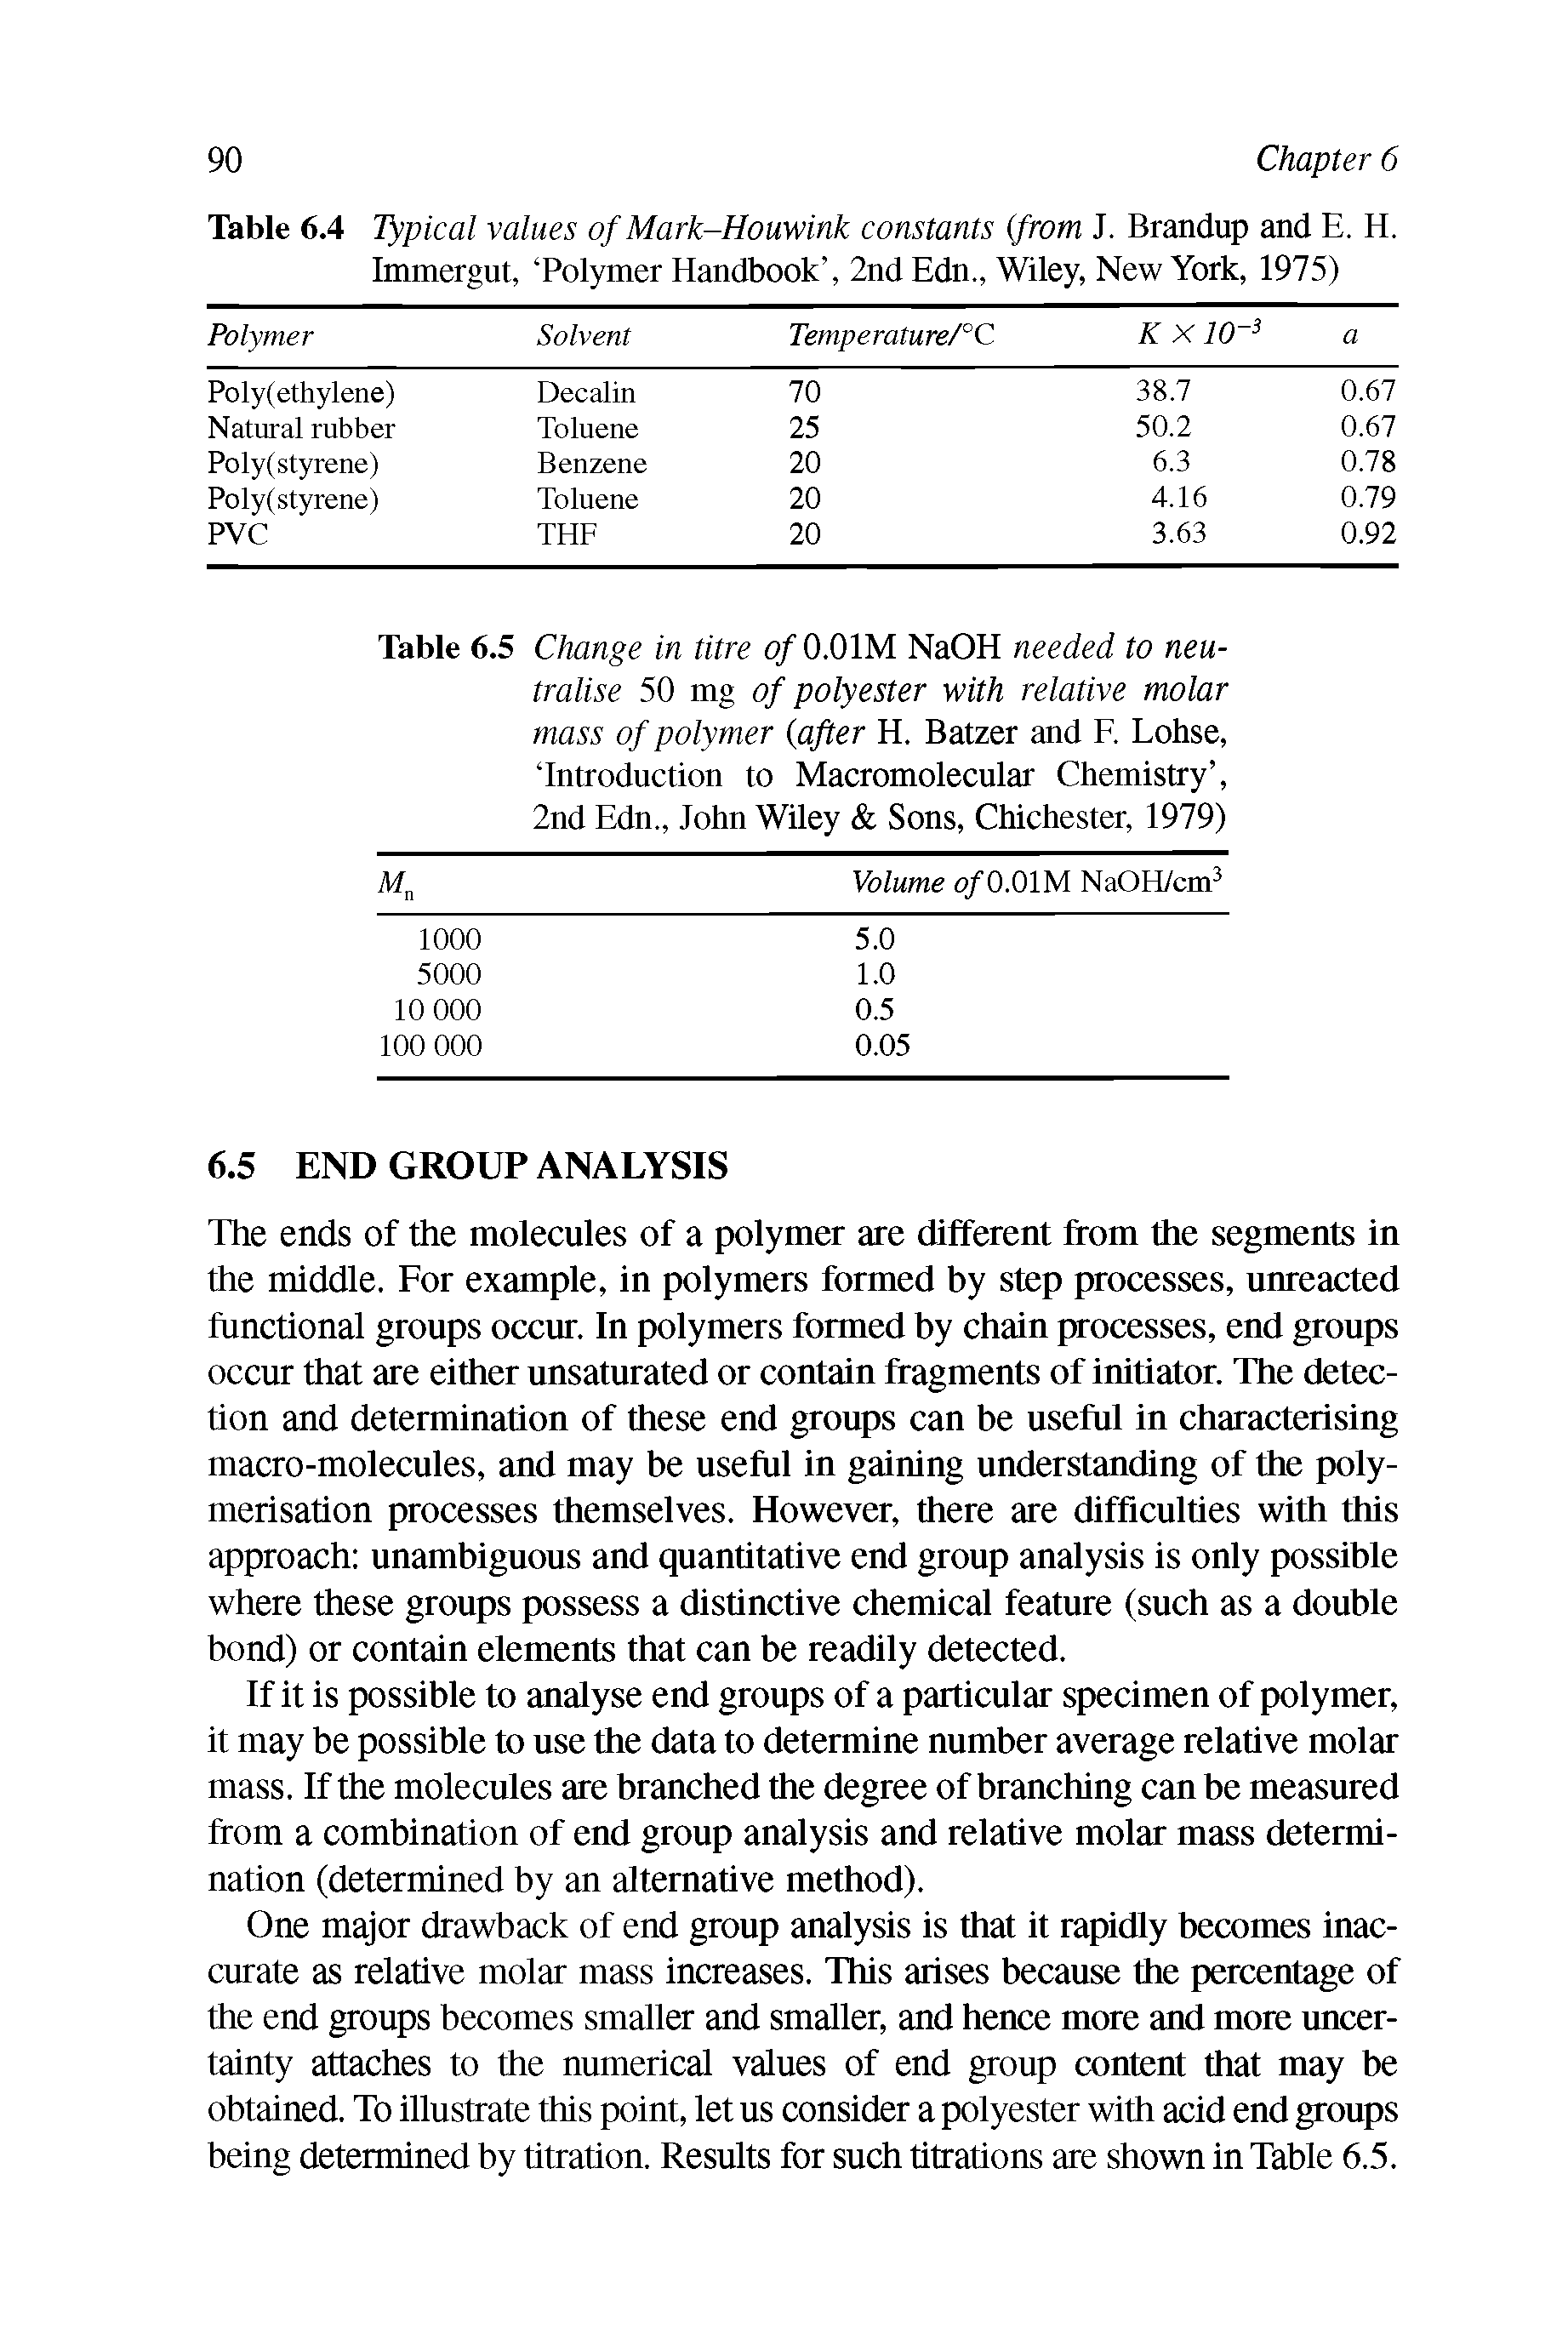 Table 6.4 Typical values of Mark-Houwink constants (from J. Brandup and E. H. Immergut, Polymer Handbook , 2nd Edn., Wiley, New York, 1975)...